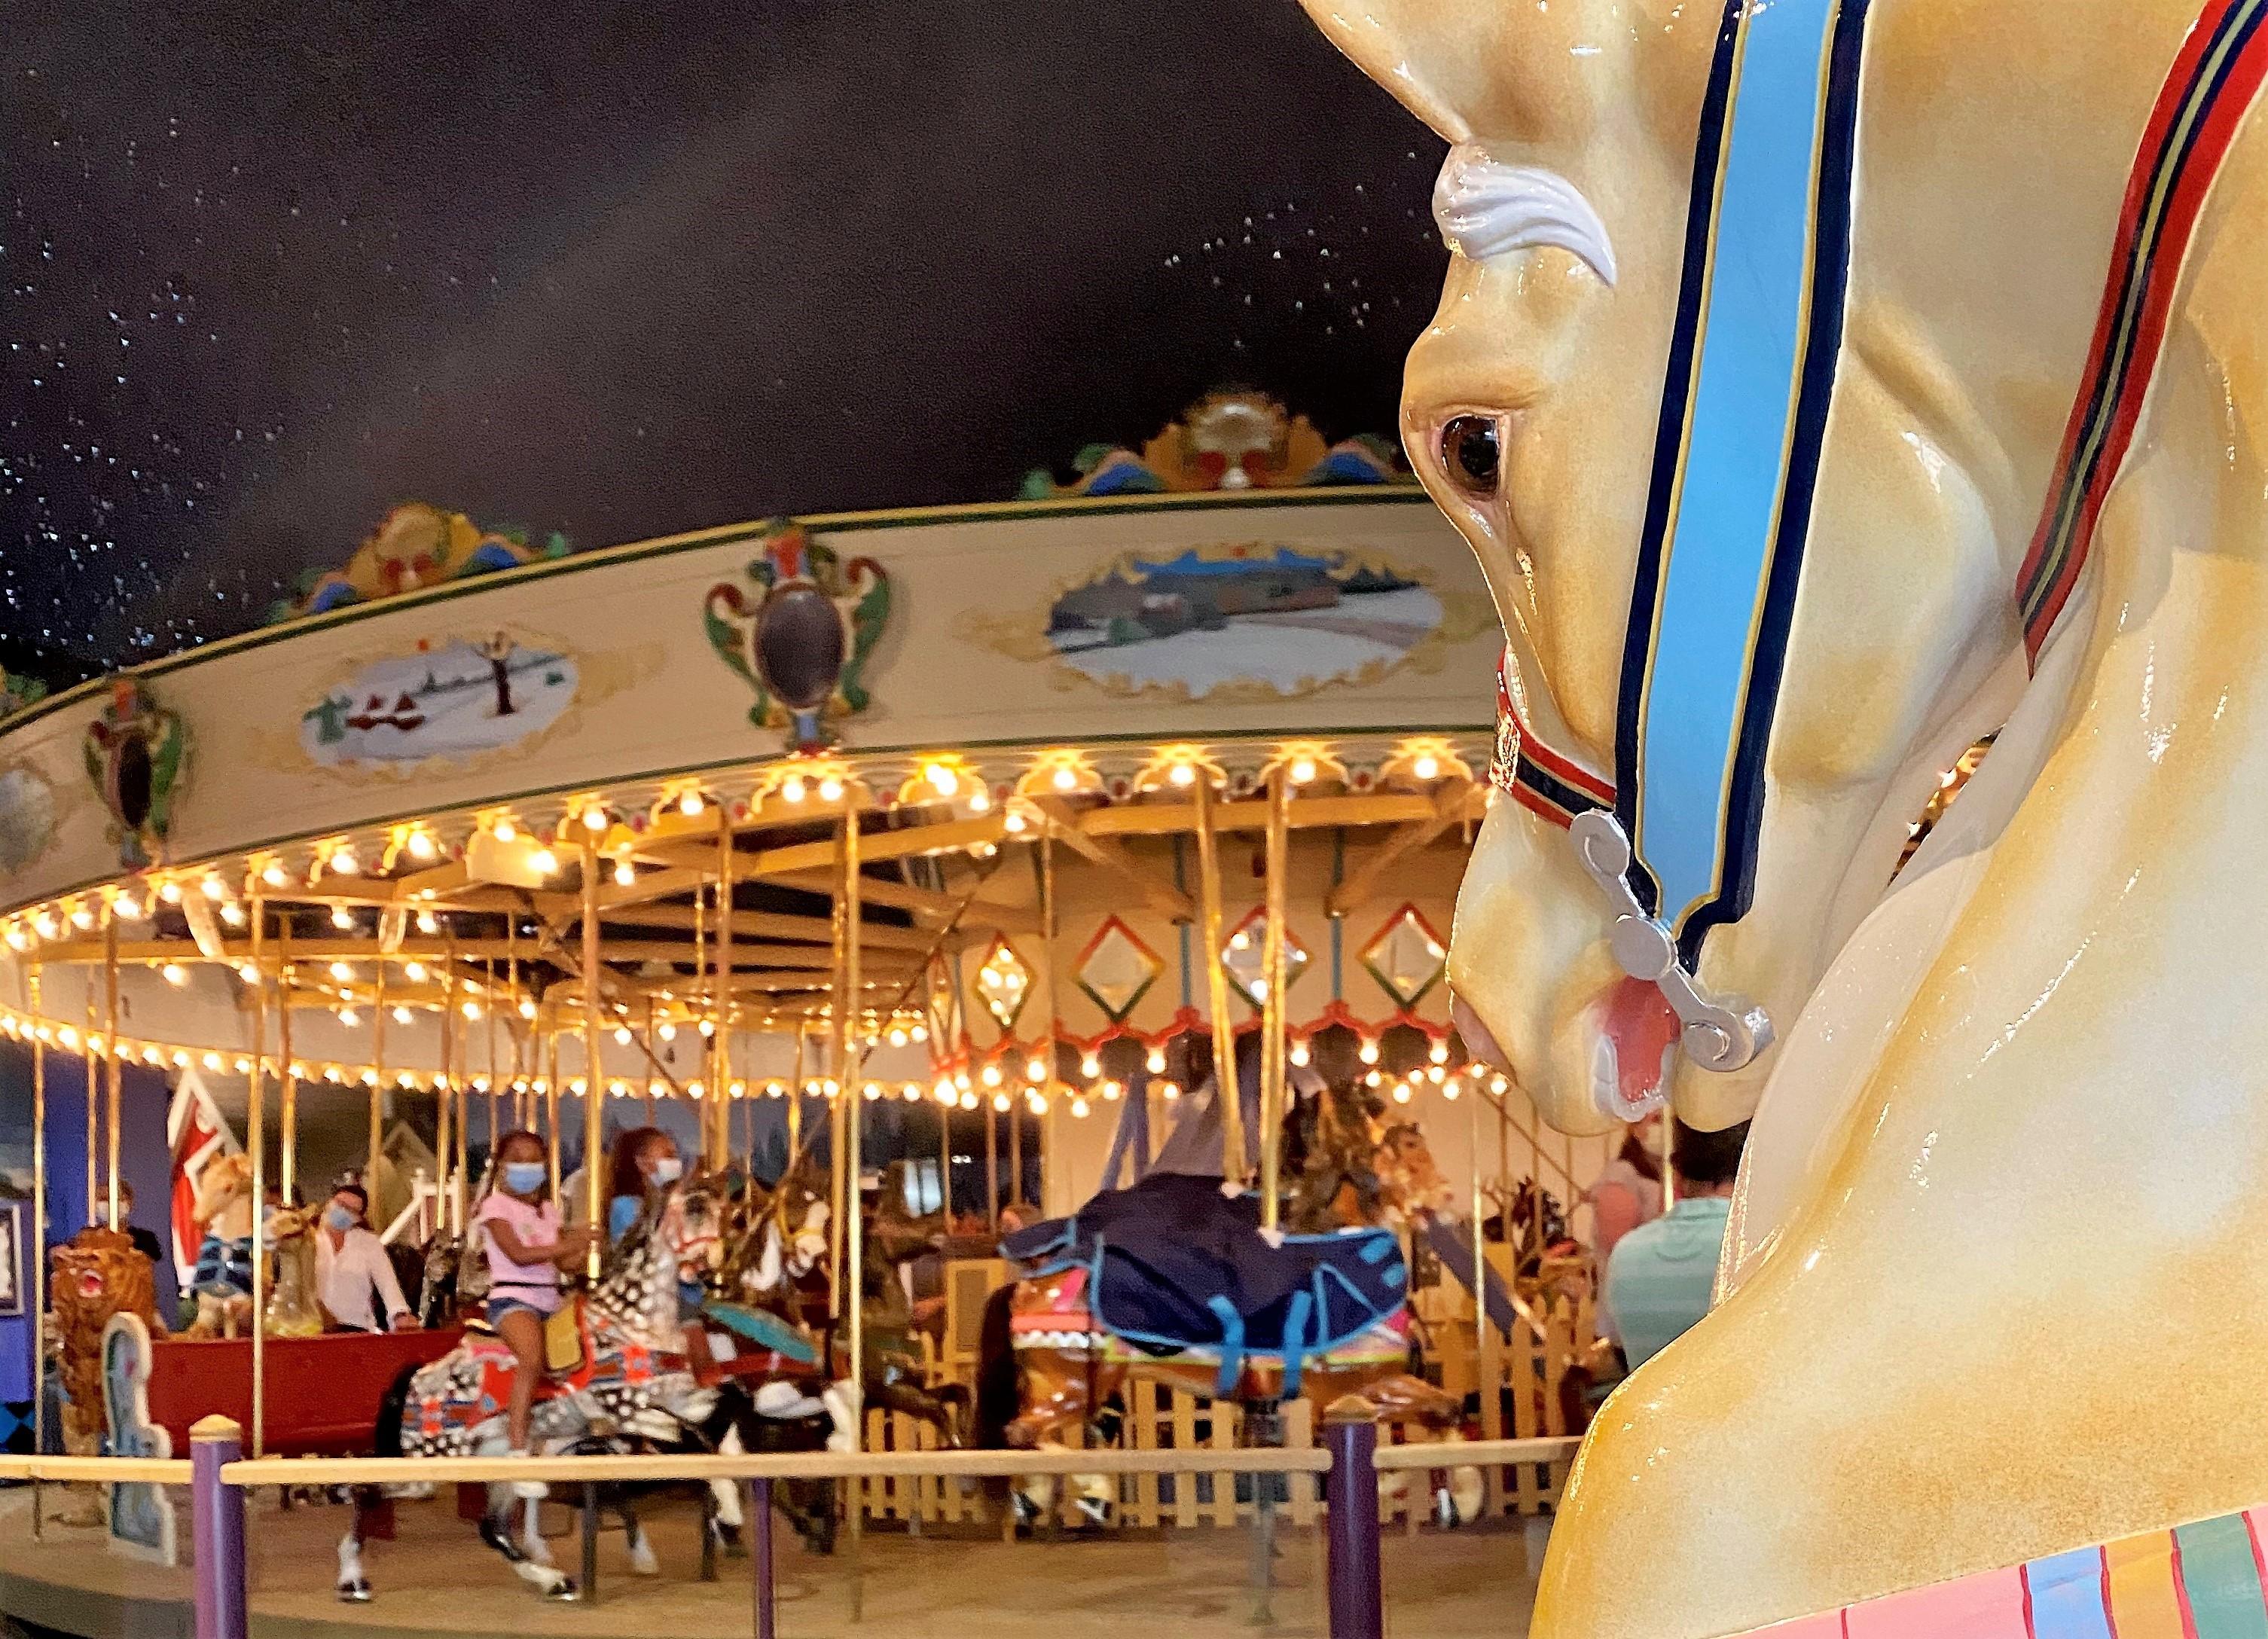 A carousel inside a building. A carousel horse is shown in the foreground.